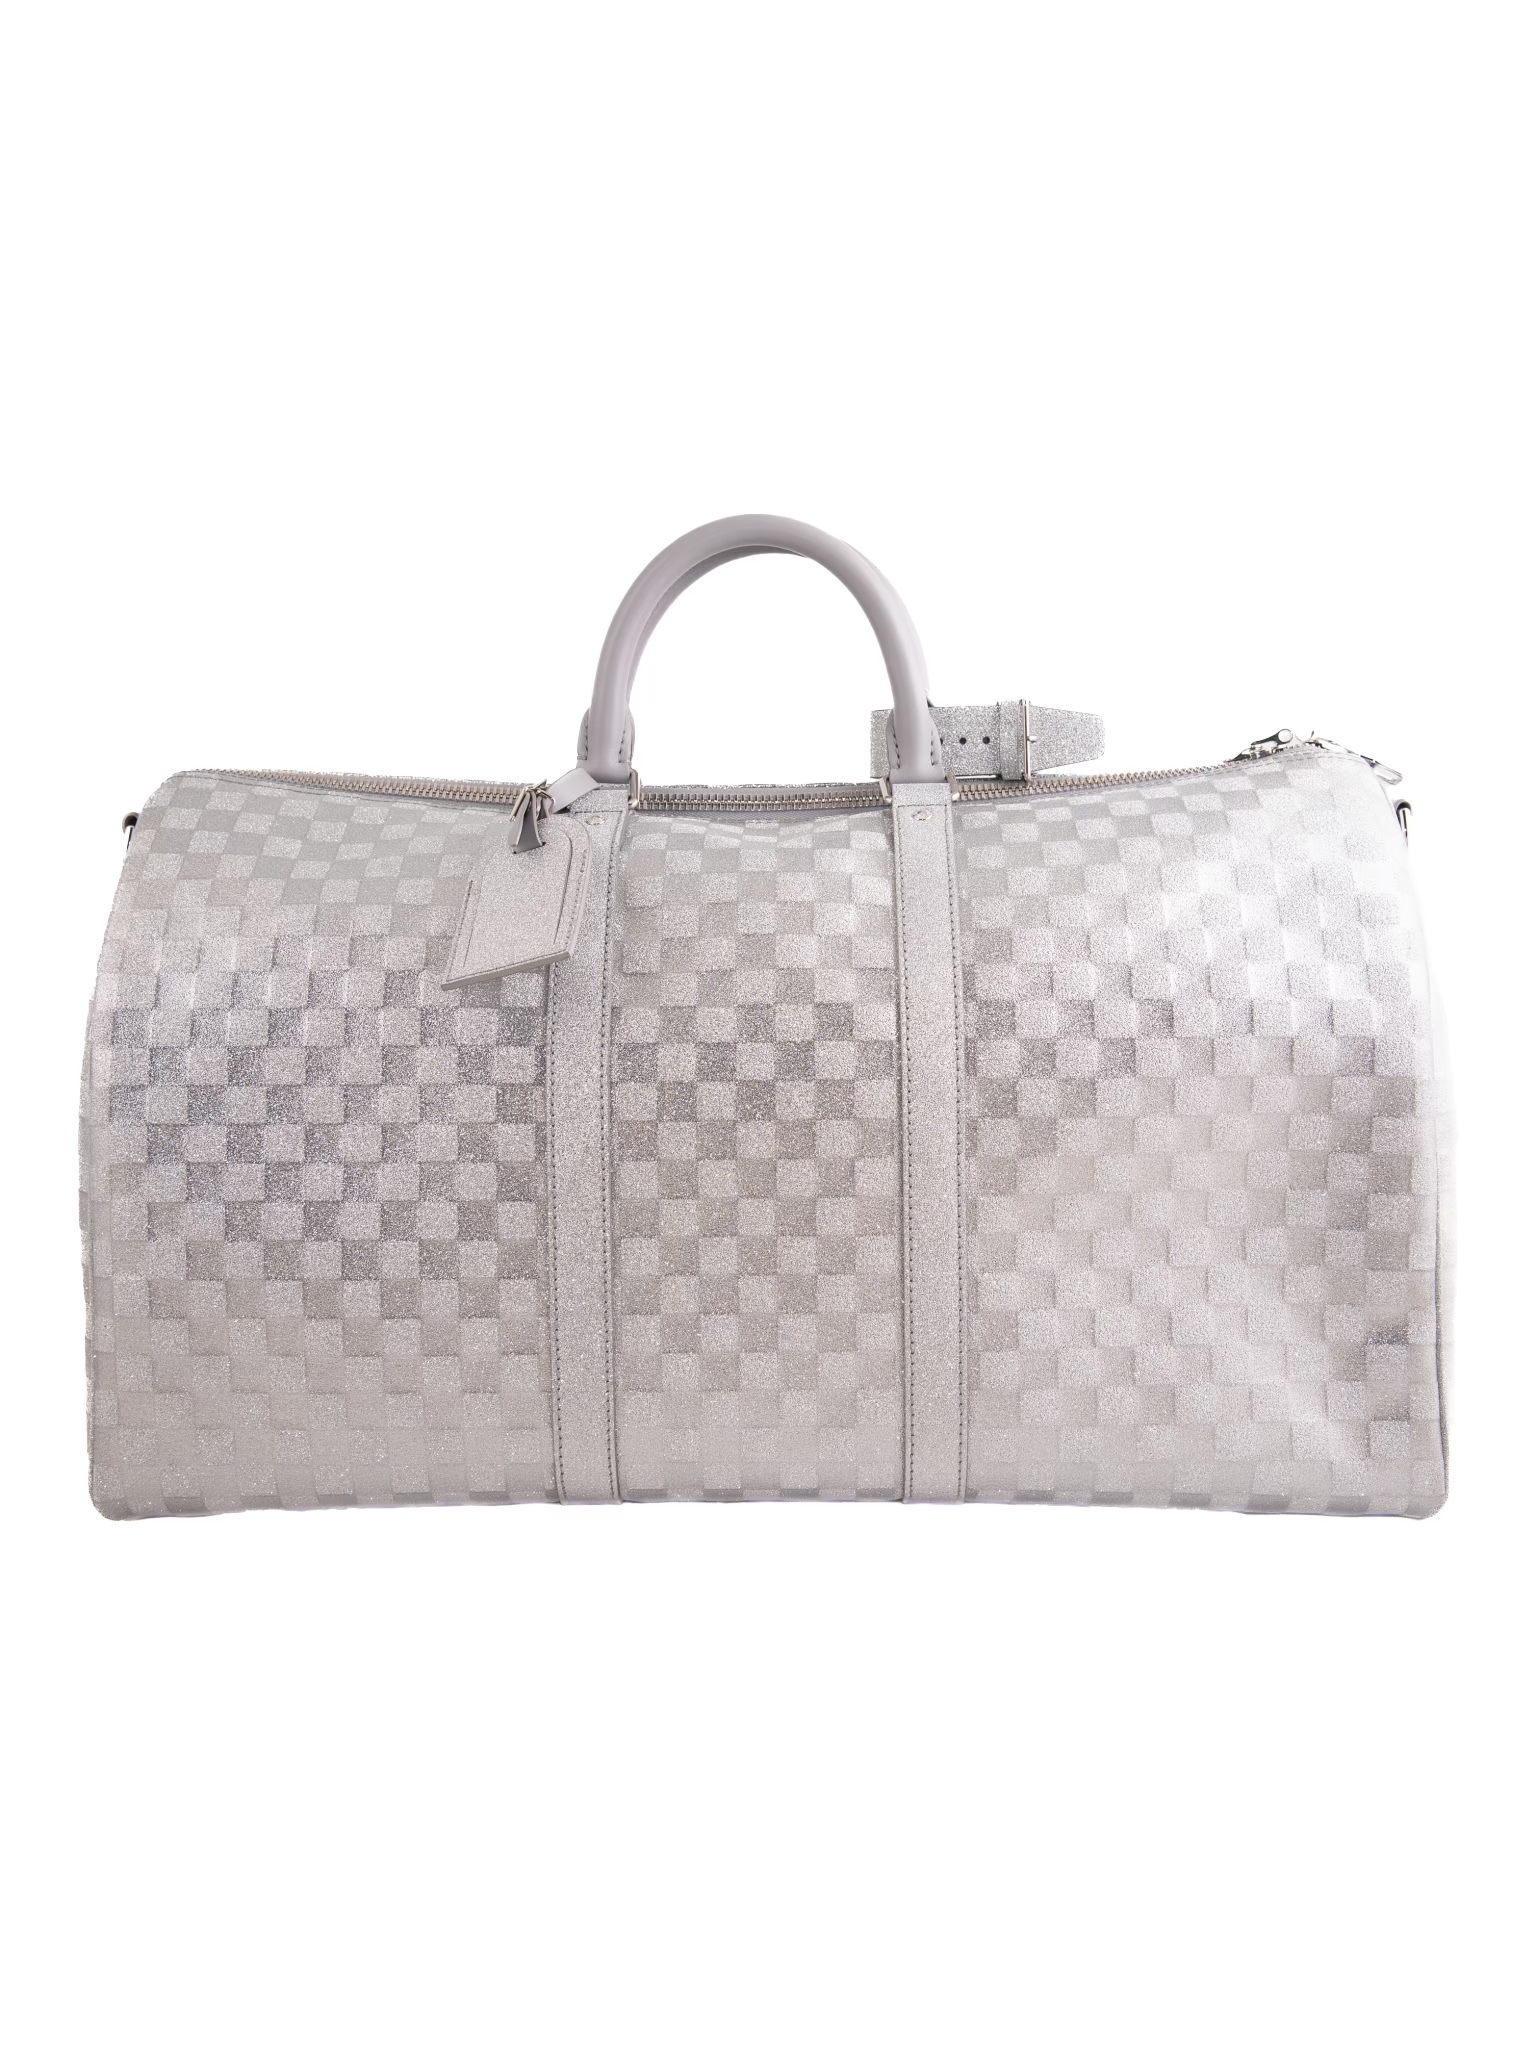 LOUIS VUITTON Keepall Bandouliere 50, 2022 Collection